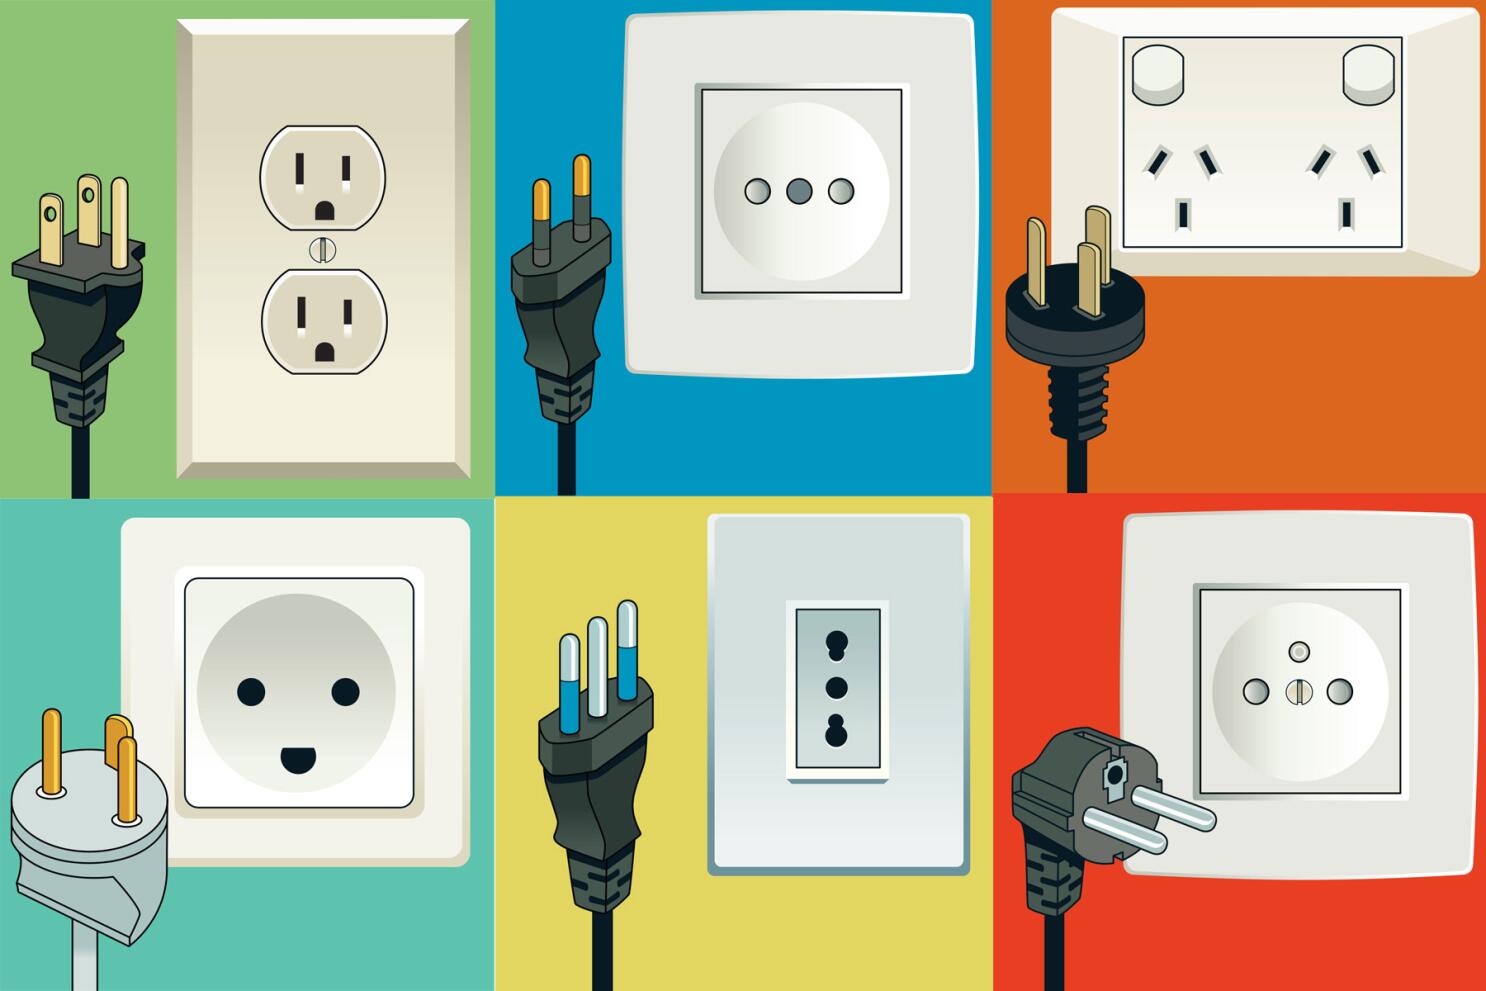 Types of Electrical Plugs: Types, Uses, Features and Benefits